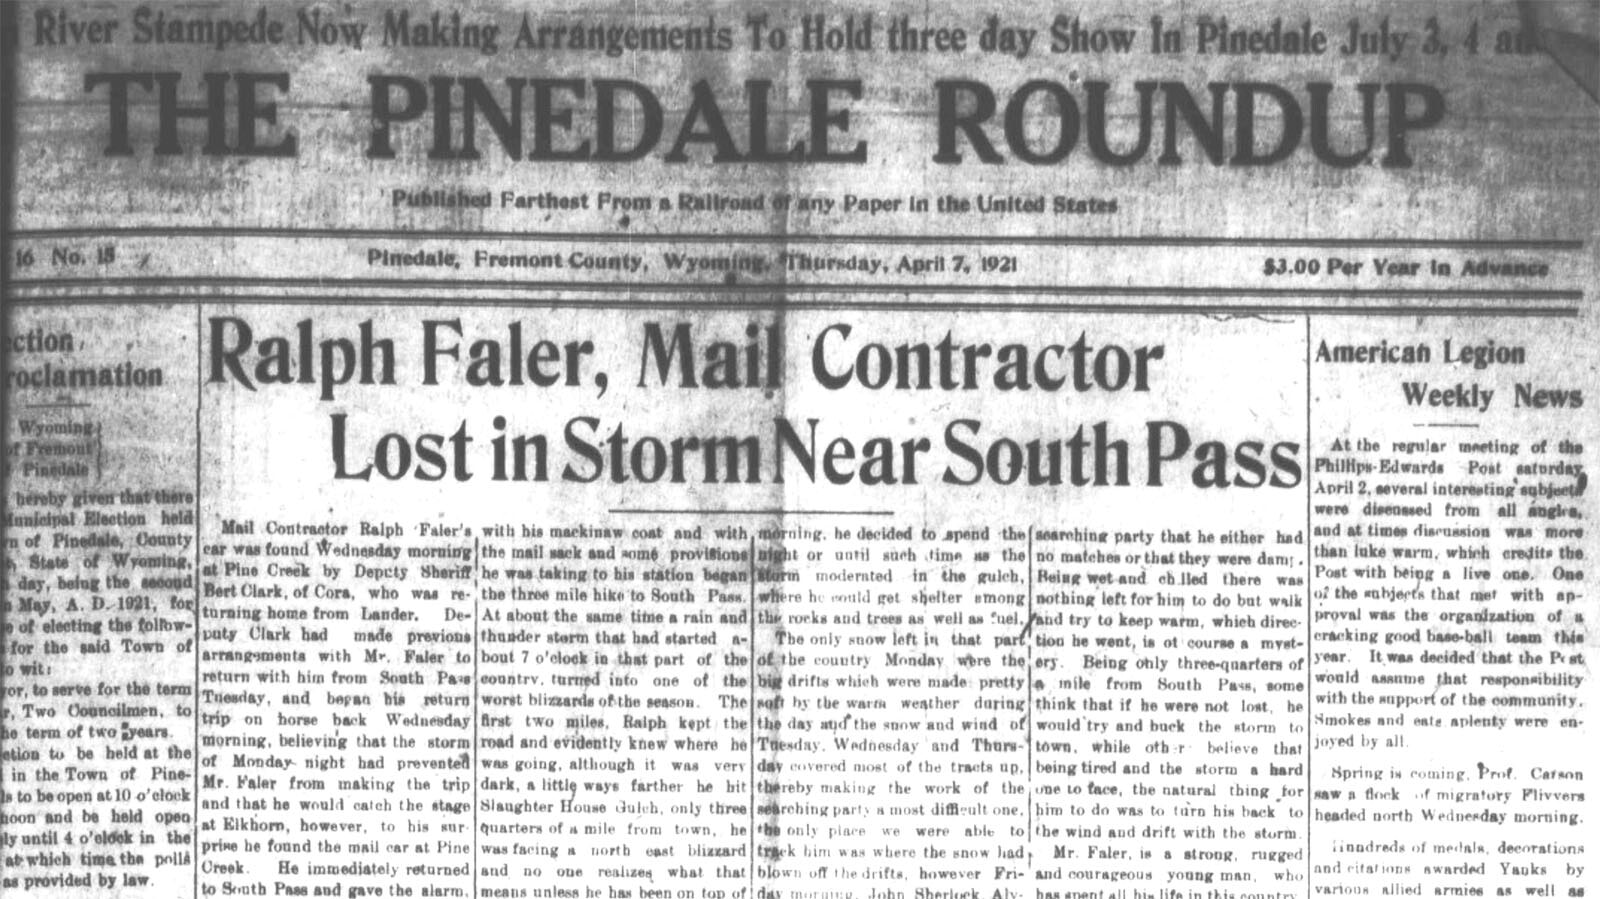 A story in the Pinedale Roundup on April 7 details the account of mailman Ralph Faler getting lost in a blizzard.